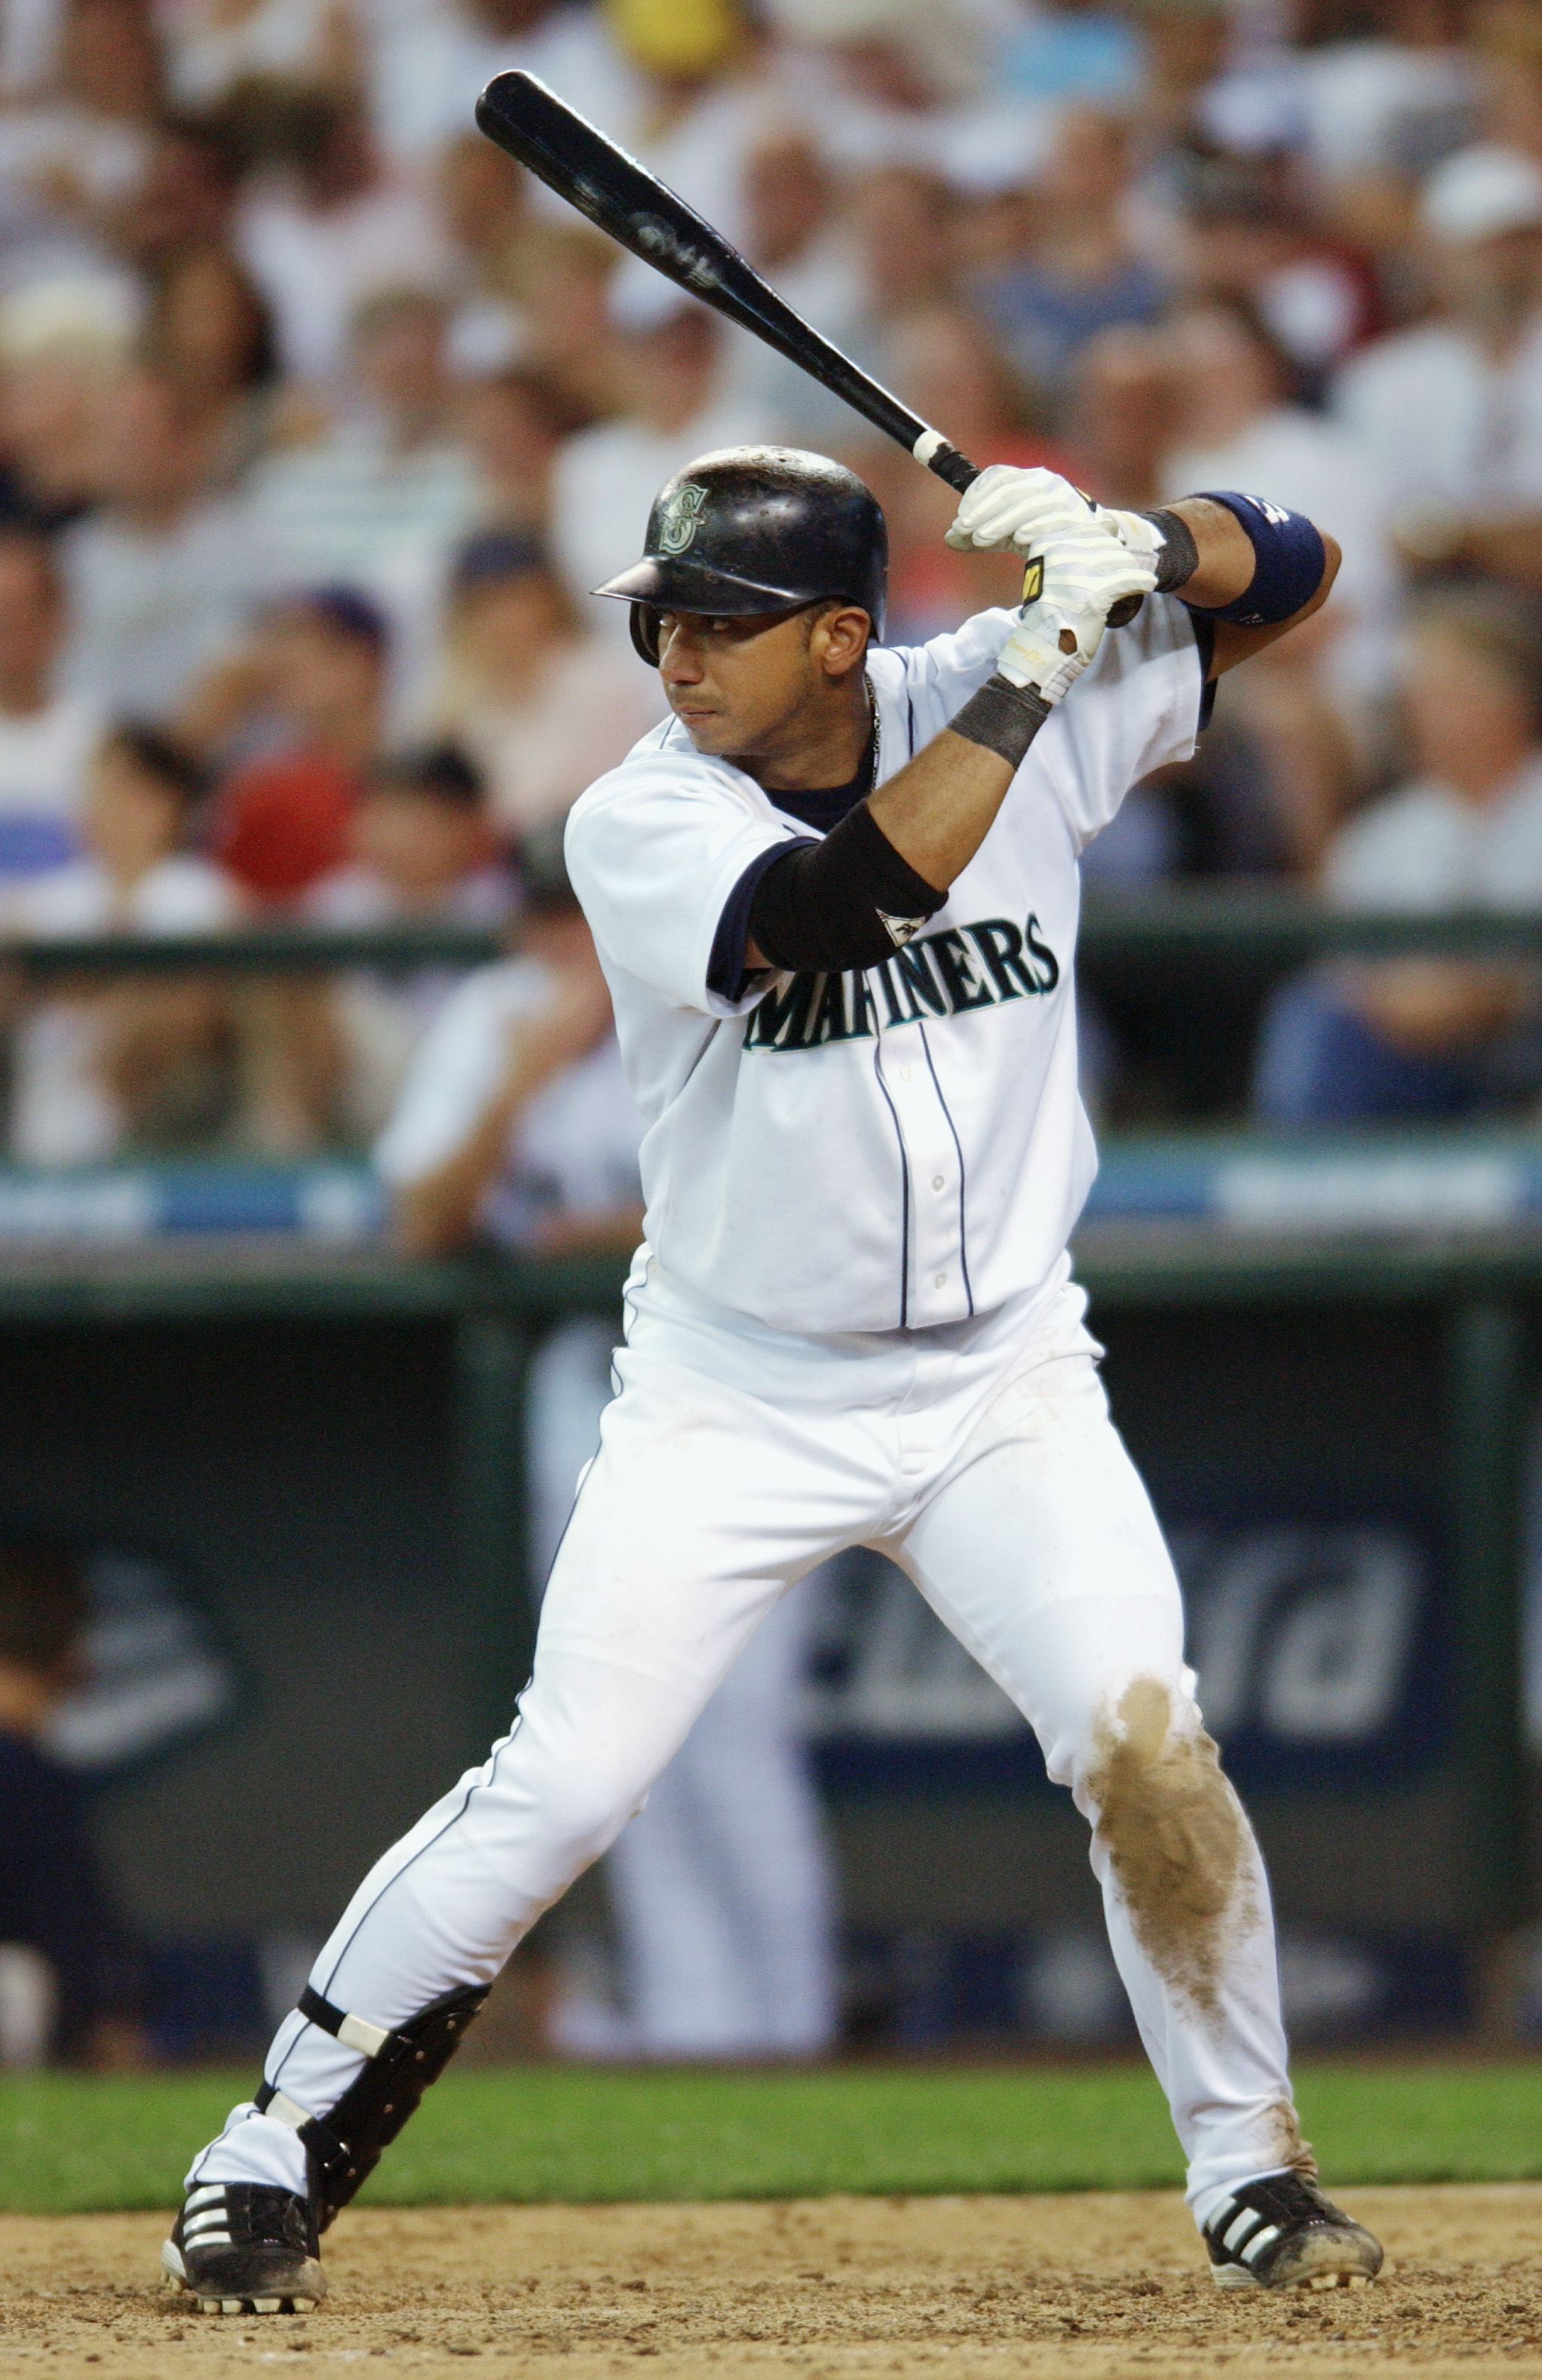 SEATTLE - JUN 29:  Shortstop Carlos Guillen #8 of the Seattle Mariners readies for the pitch during interleague play against the San Diego Padres at Safeco Field on June 29, 2003 in Seattle, Washington.  The Padres defeated the Mariners 8-6.  (Photo by Ot